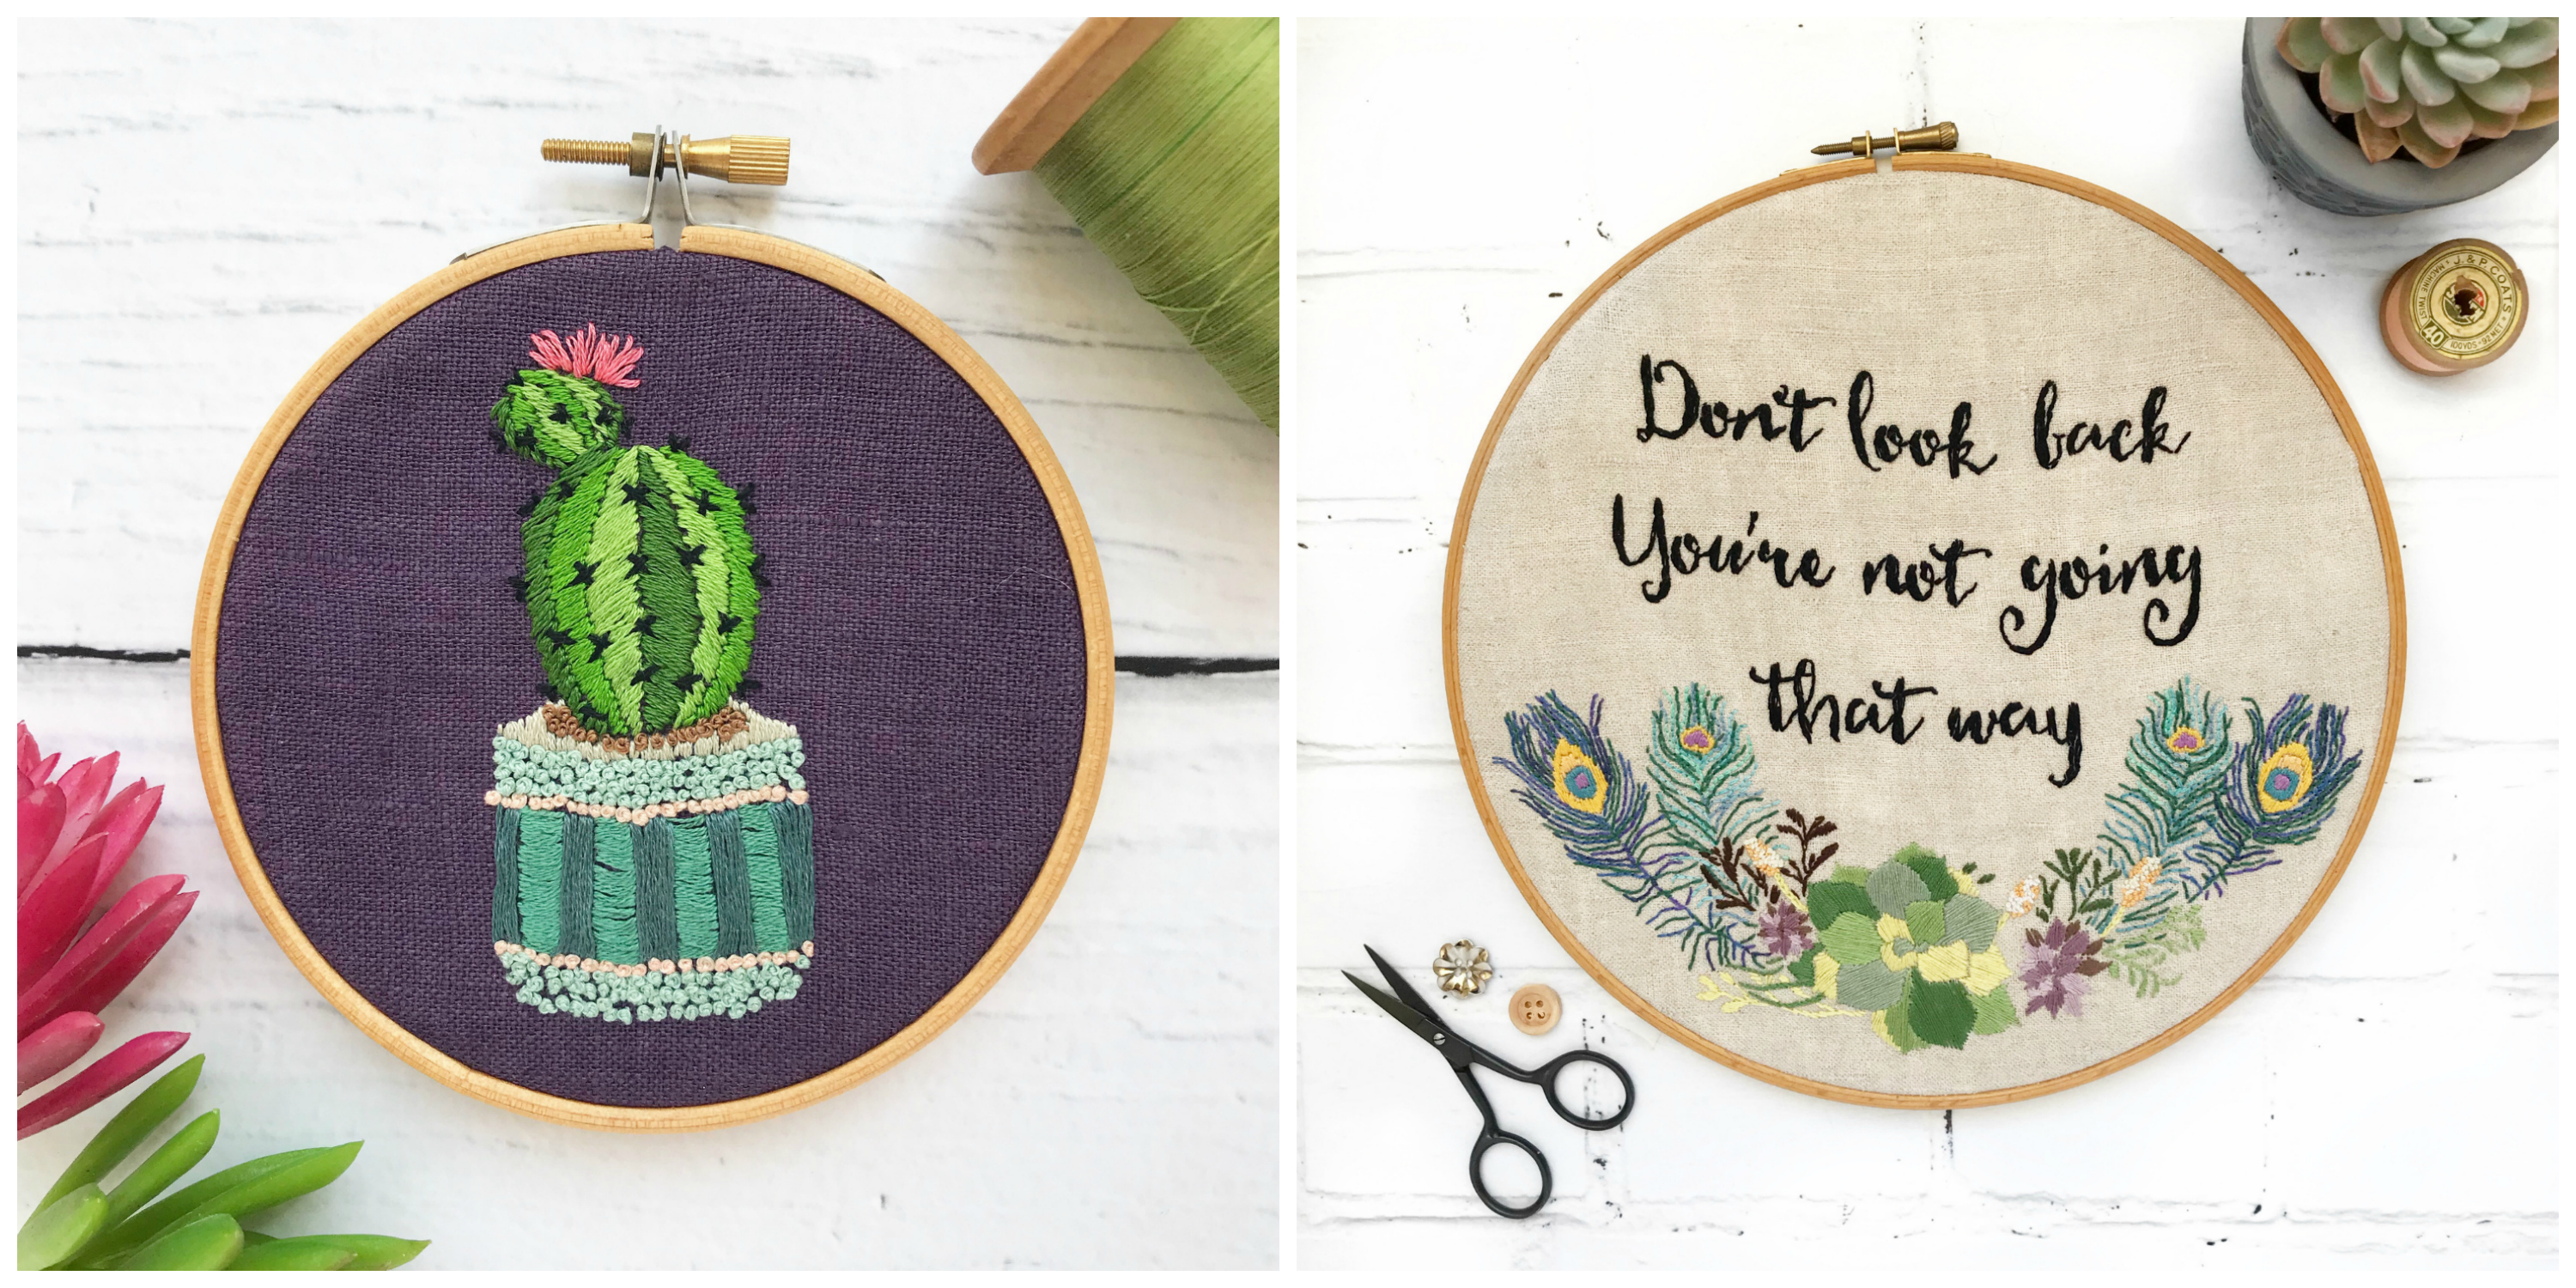 How to back an embroidered item #diyembroidery #howto #embroidery